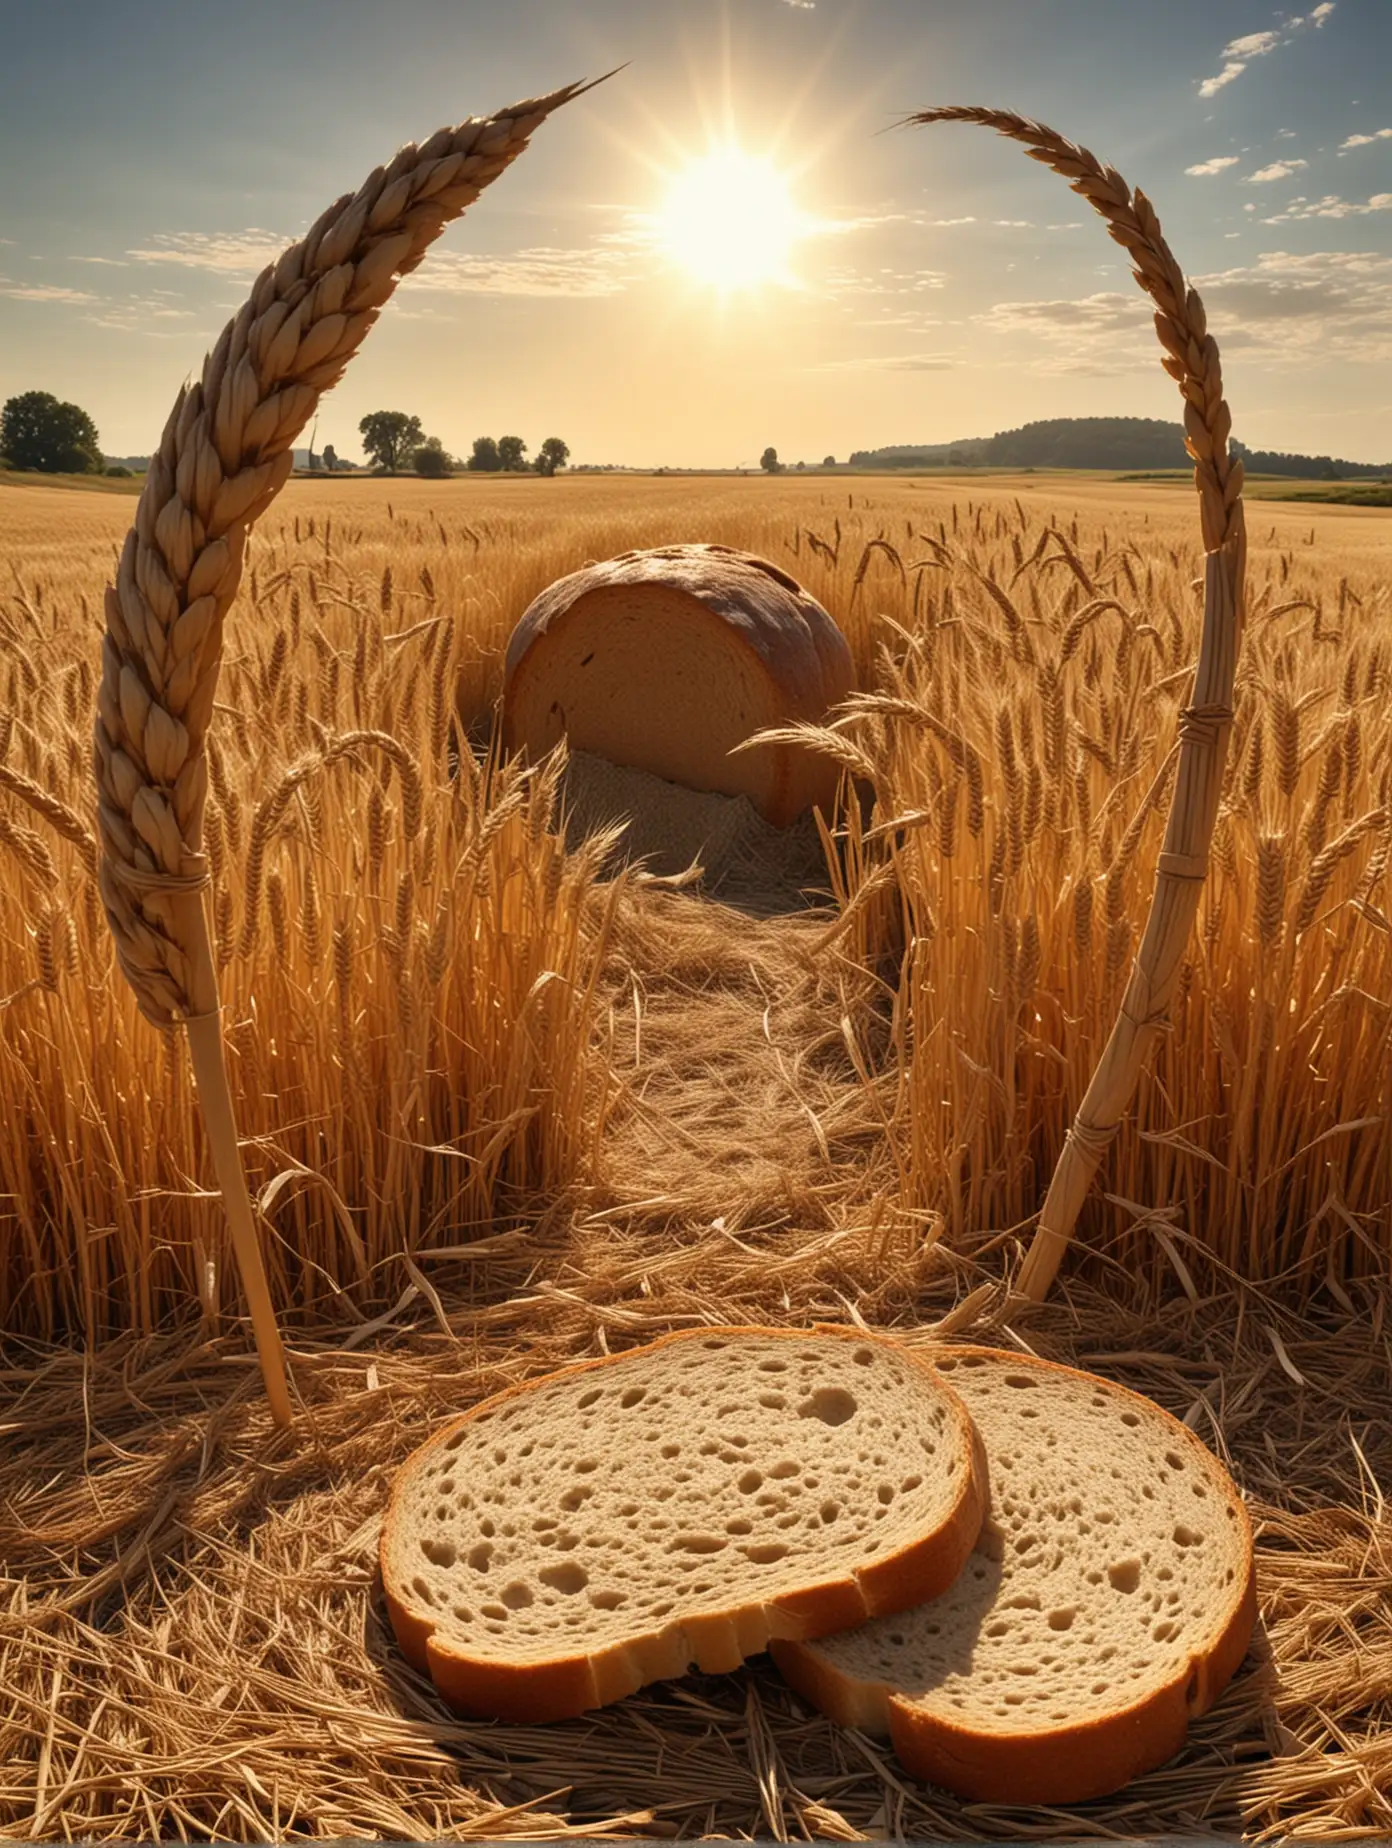 Harvesting-Scythe-with-Wheat-Haystack-and-Fresh-Bread-Loaf-under-Sunlight